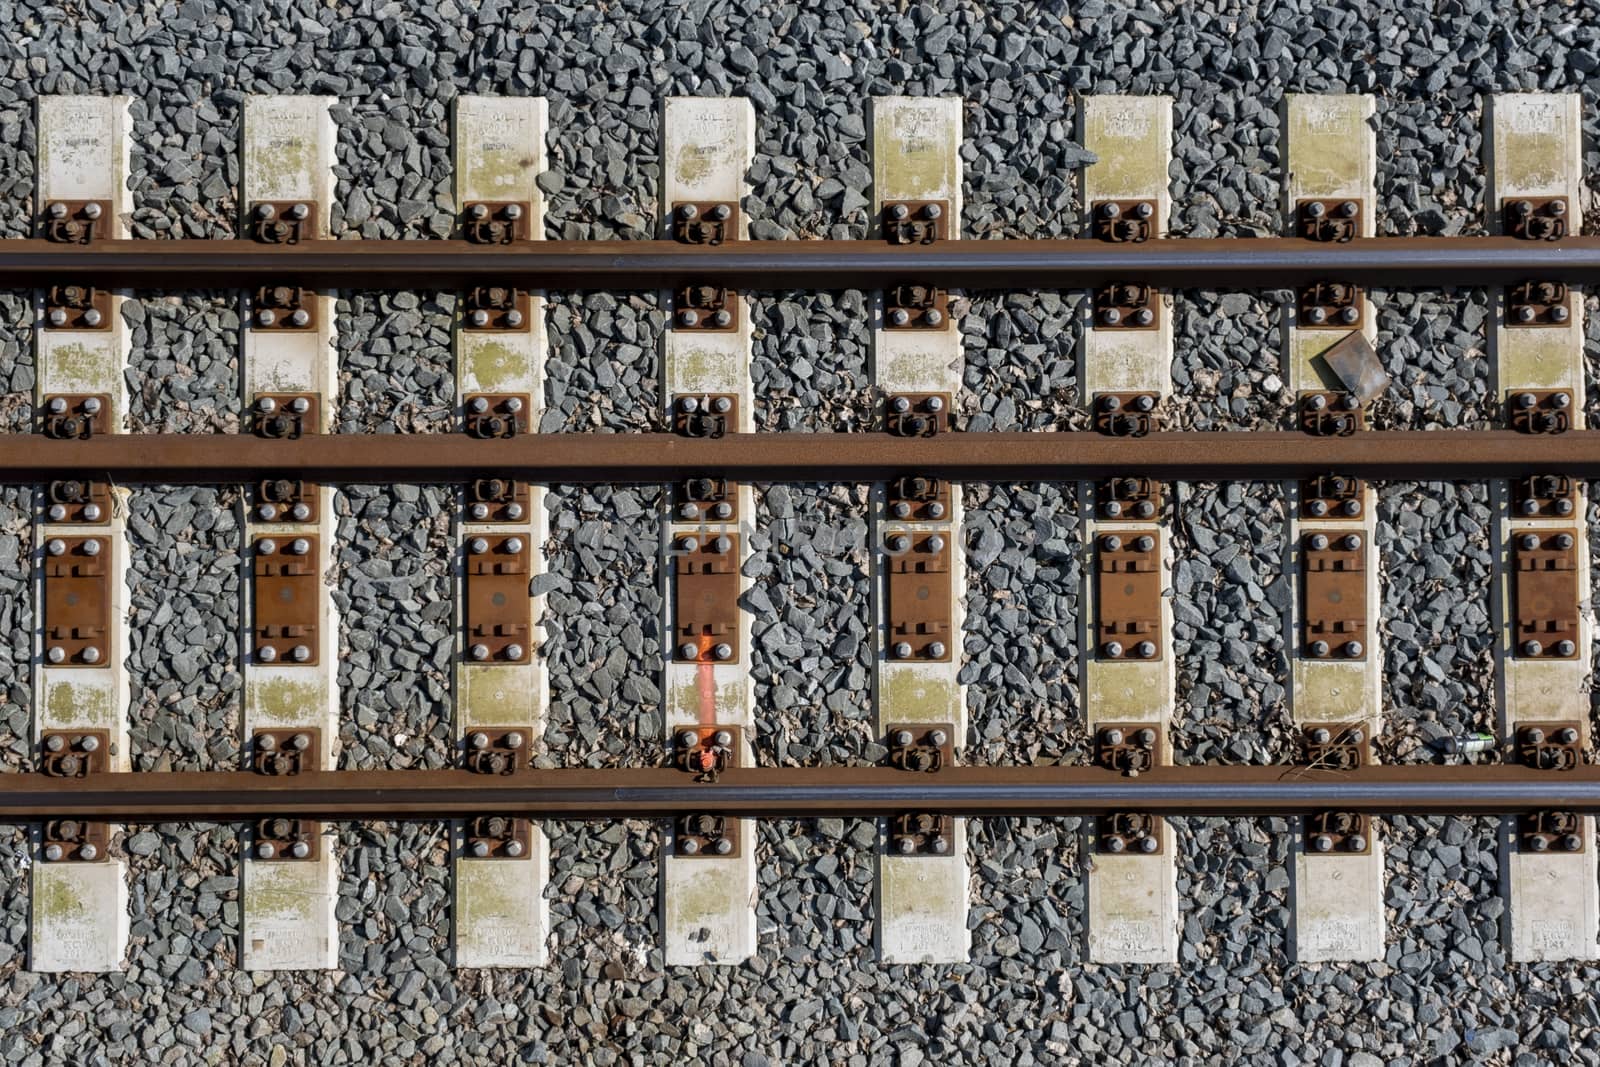 Train Tracks Detail from Above. Close up by Tjeerdkruse